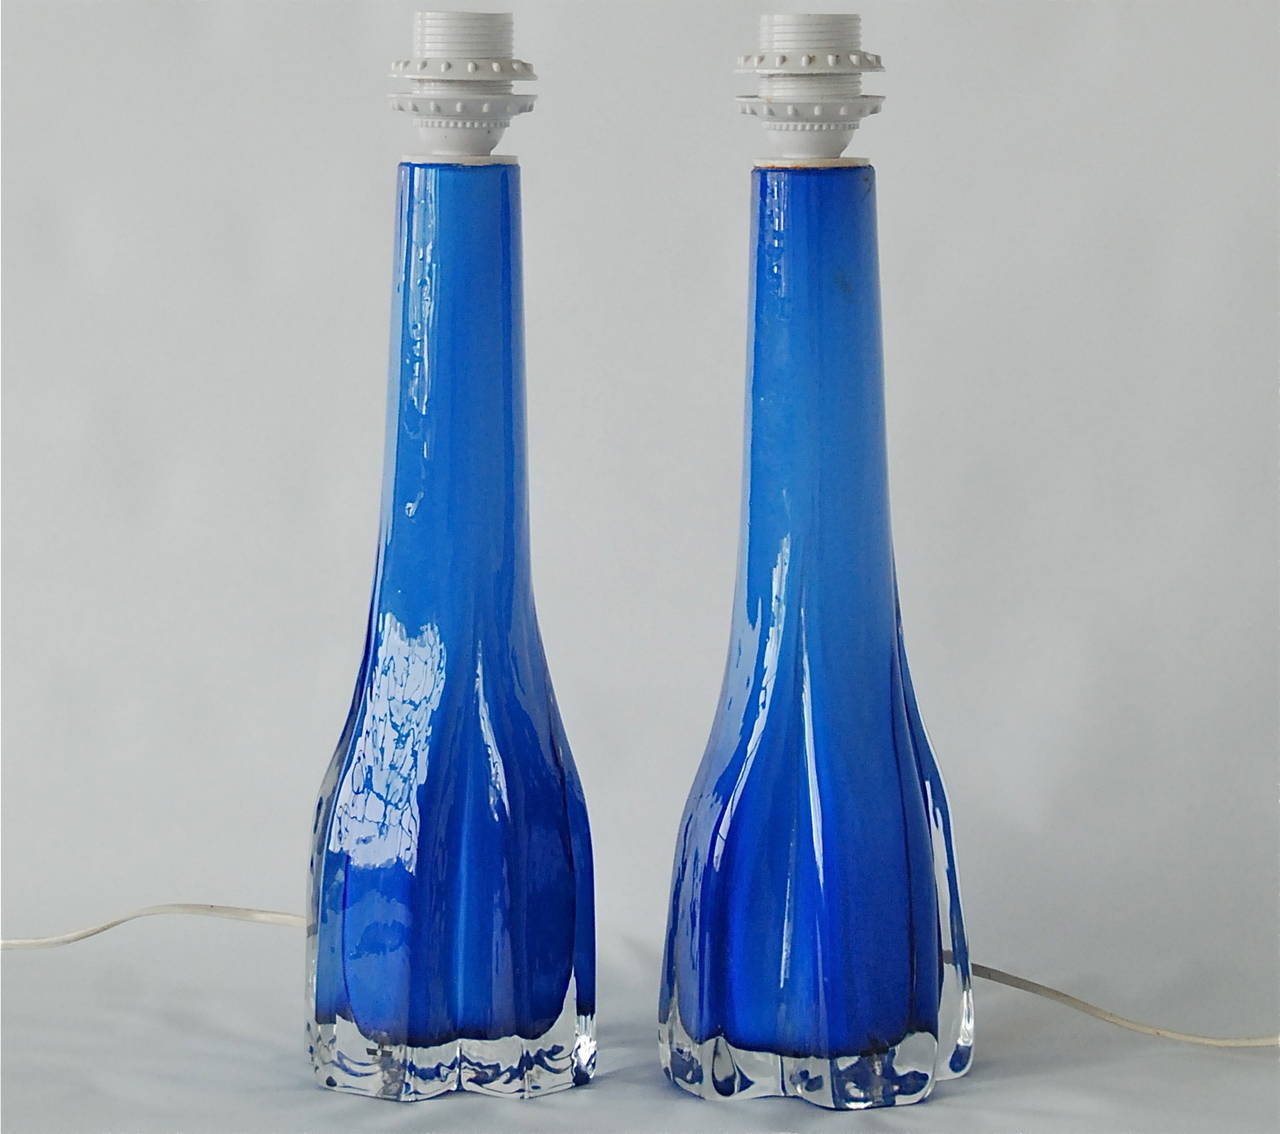 A pair of table lamps by Flygsfors, Sweden, circa 1970.
Tinted glass. Base height 14